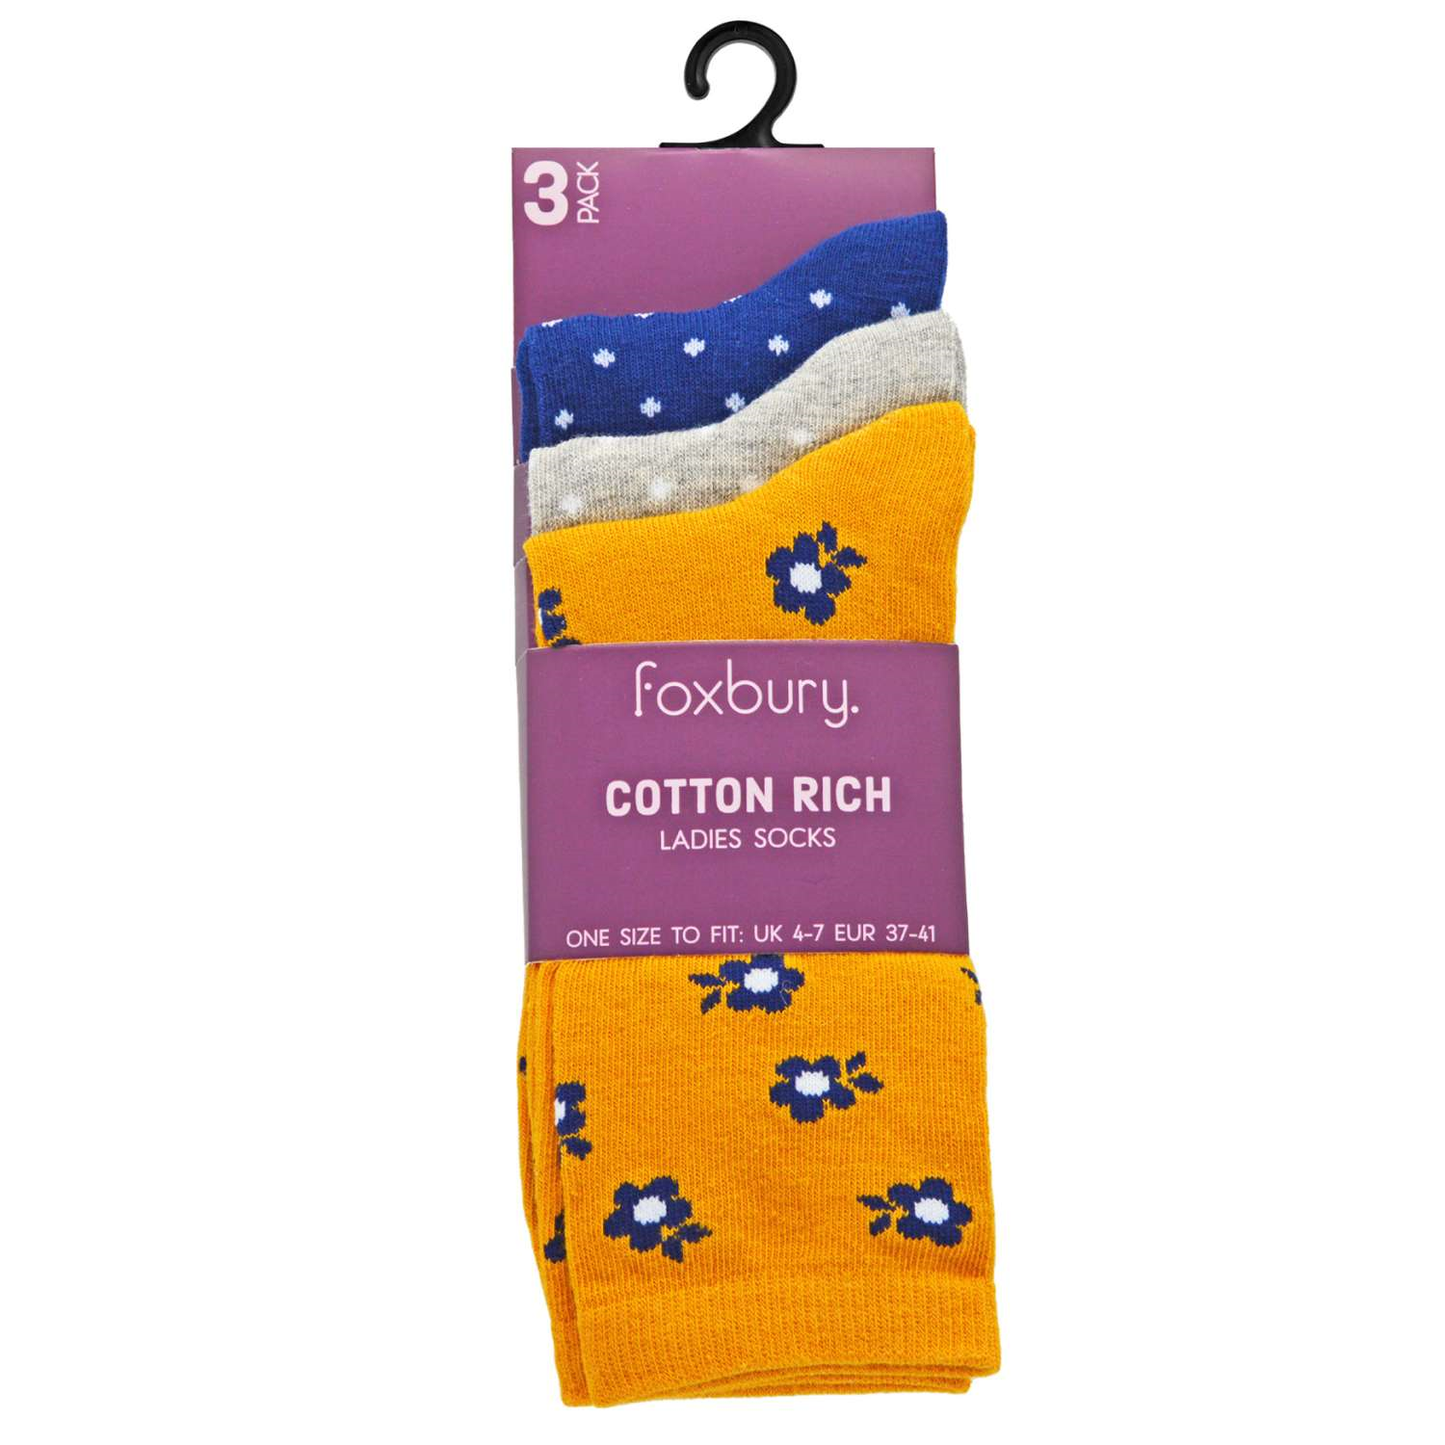 Ladies Cotton Rich Socks 3 Pack (Size 4-7) - Assorted Designs